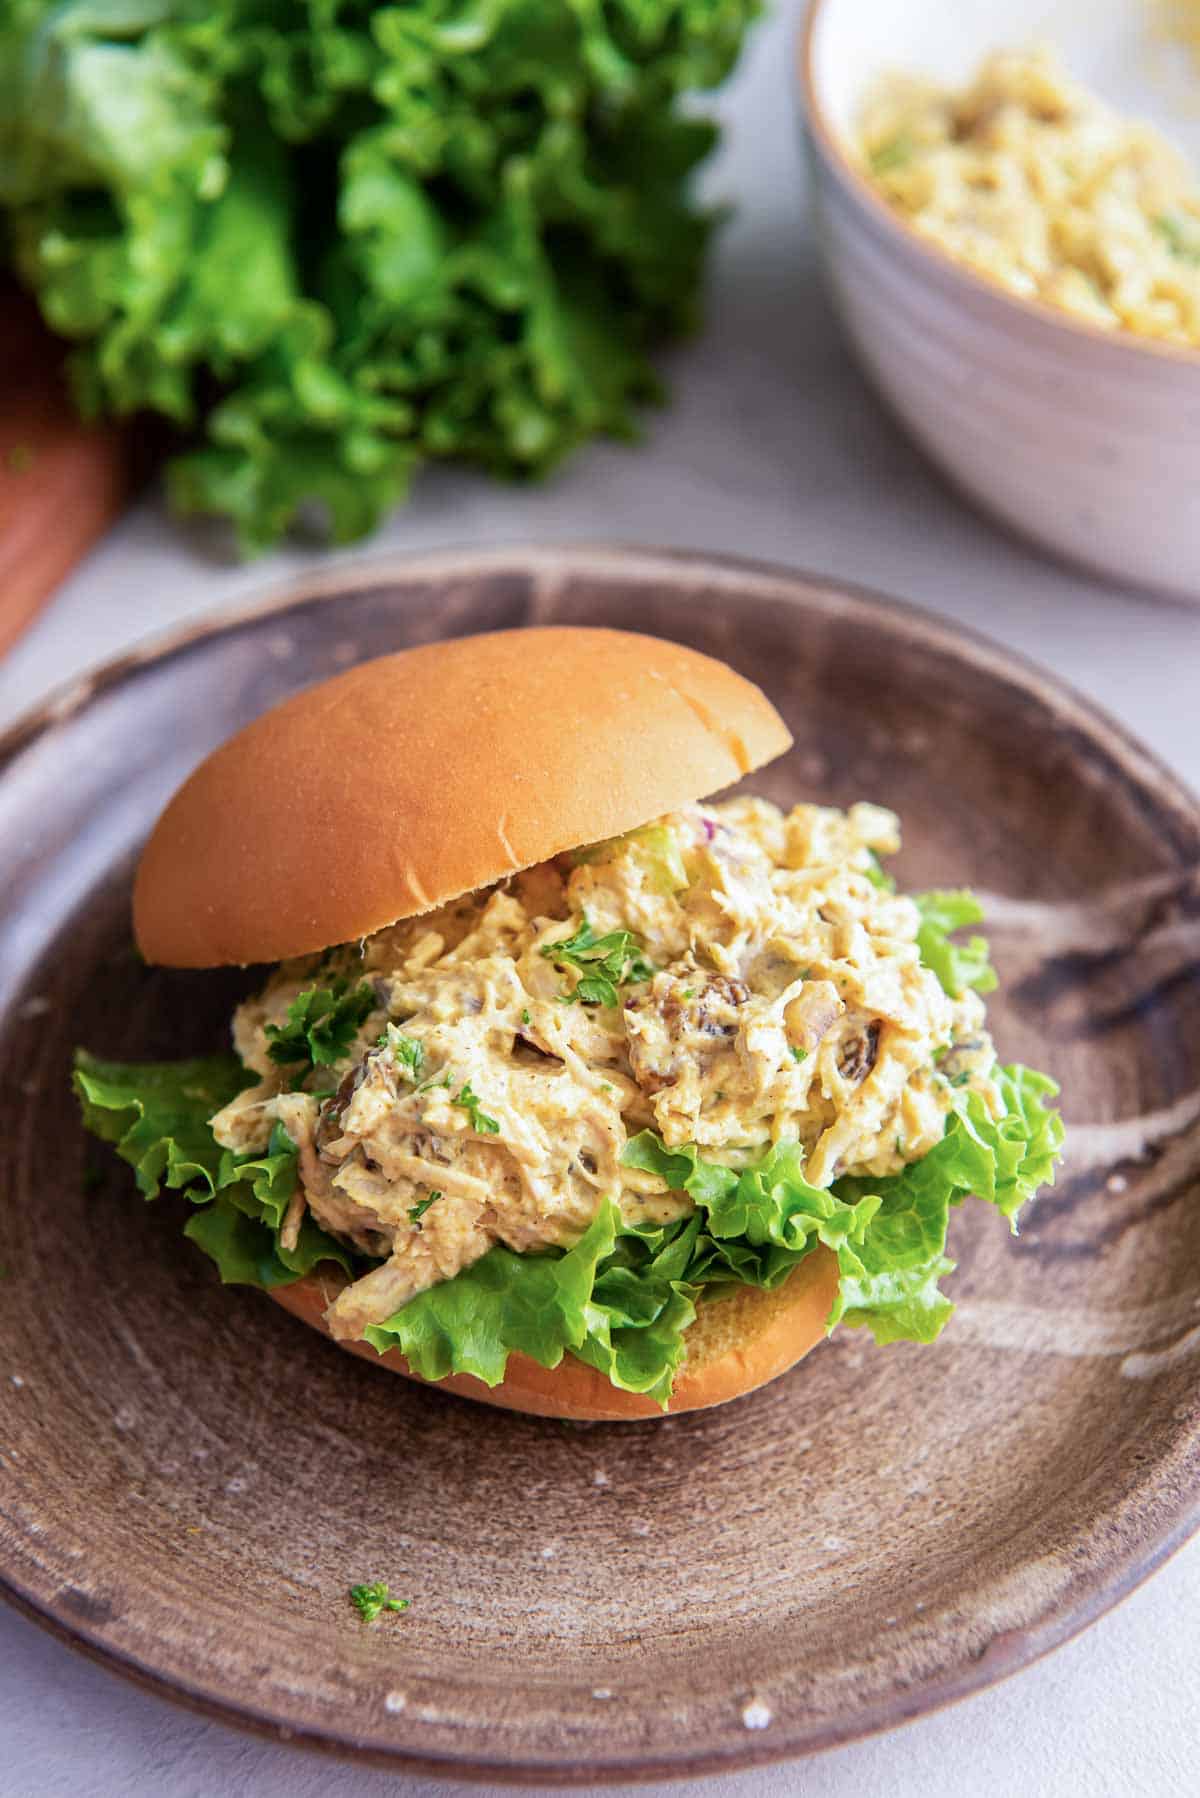 A small sandwich roll filled with curry chicken salad and lettuce on a wooden plate.